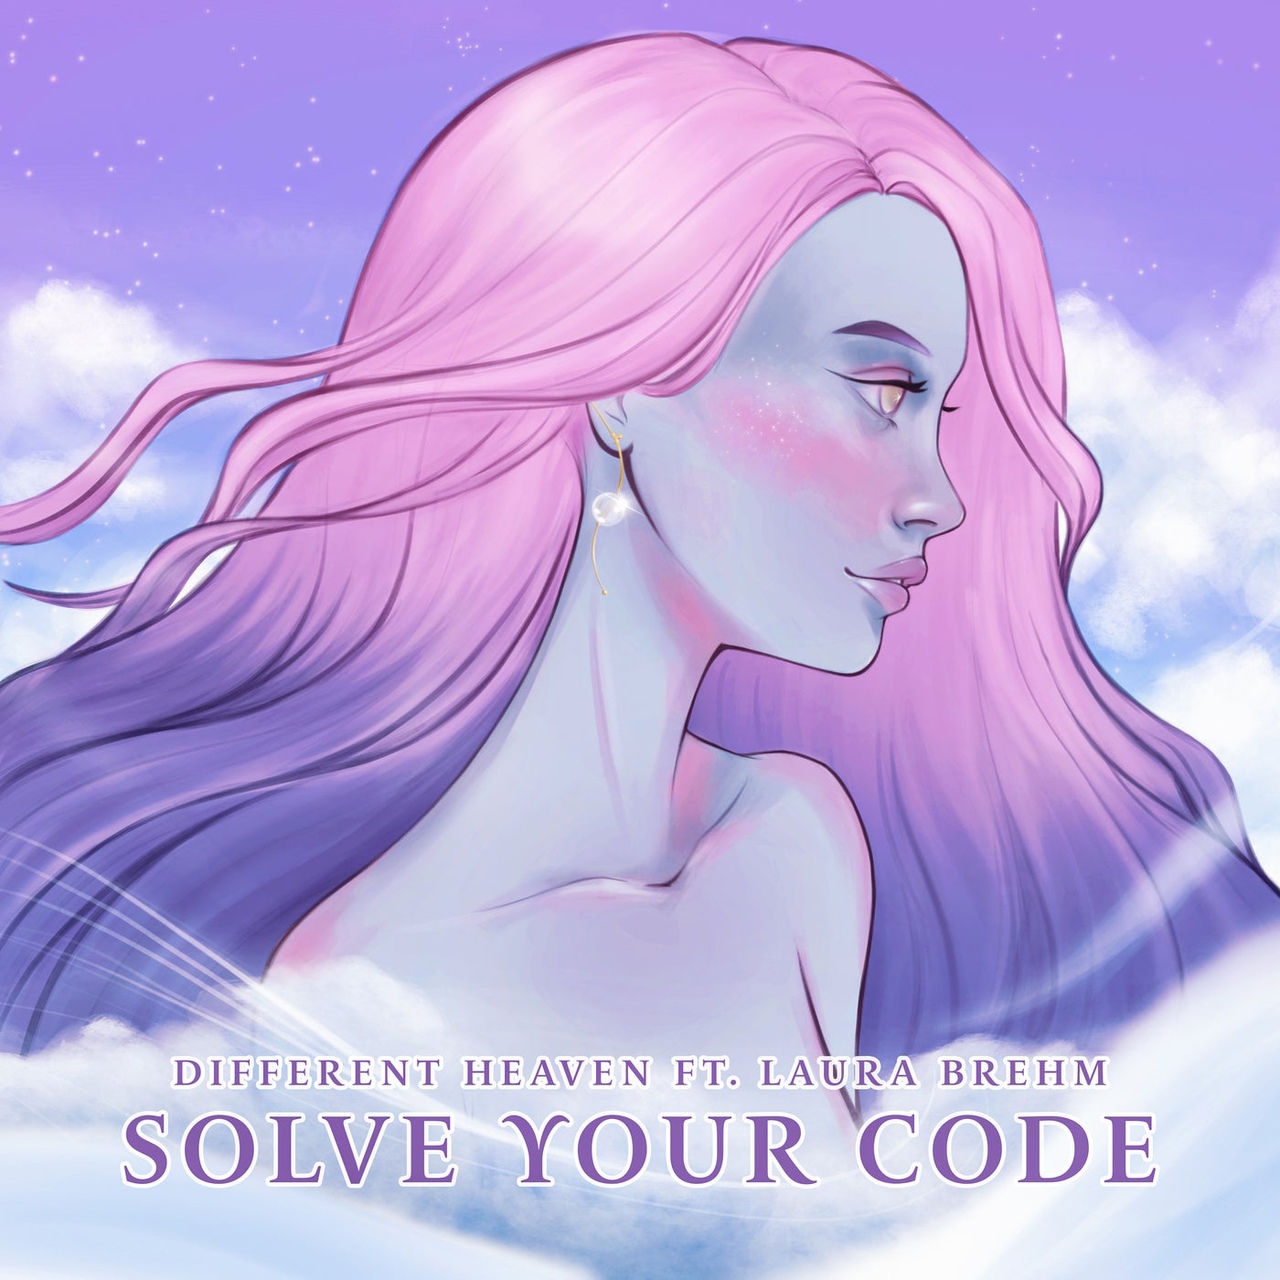 Different Heaven featuring Laura Brehm — Solve Your Code cover artwork